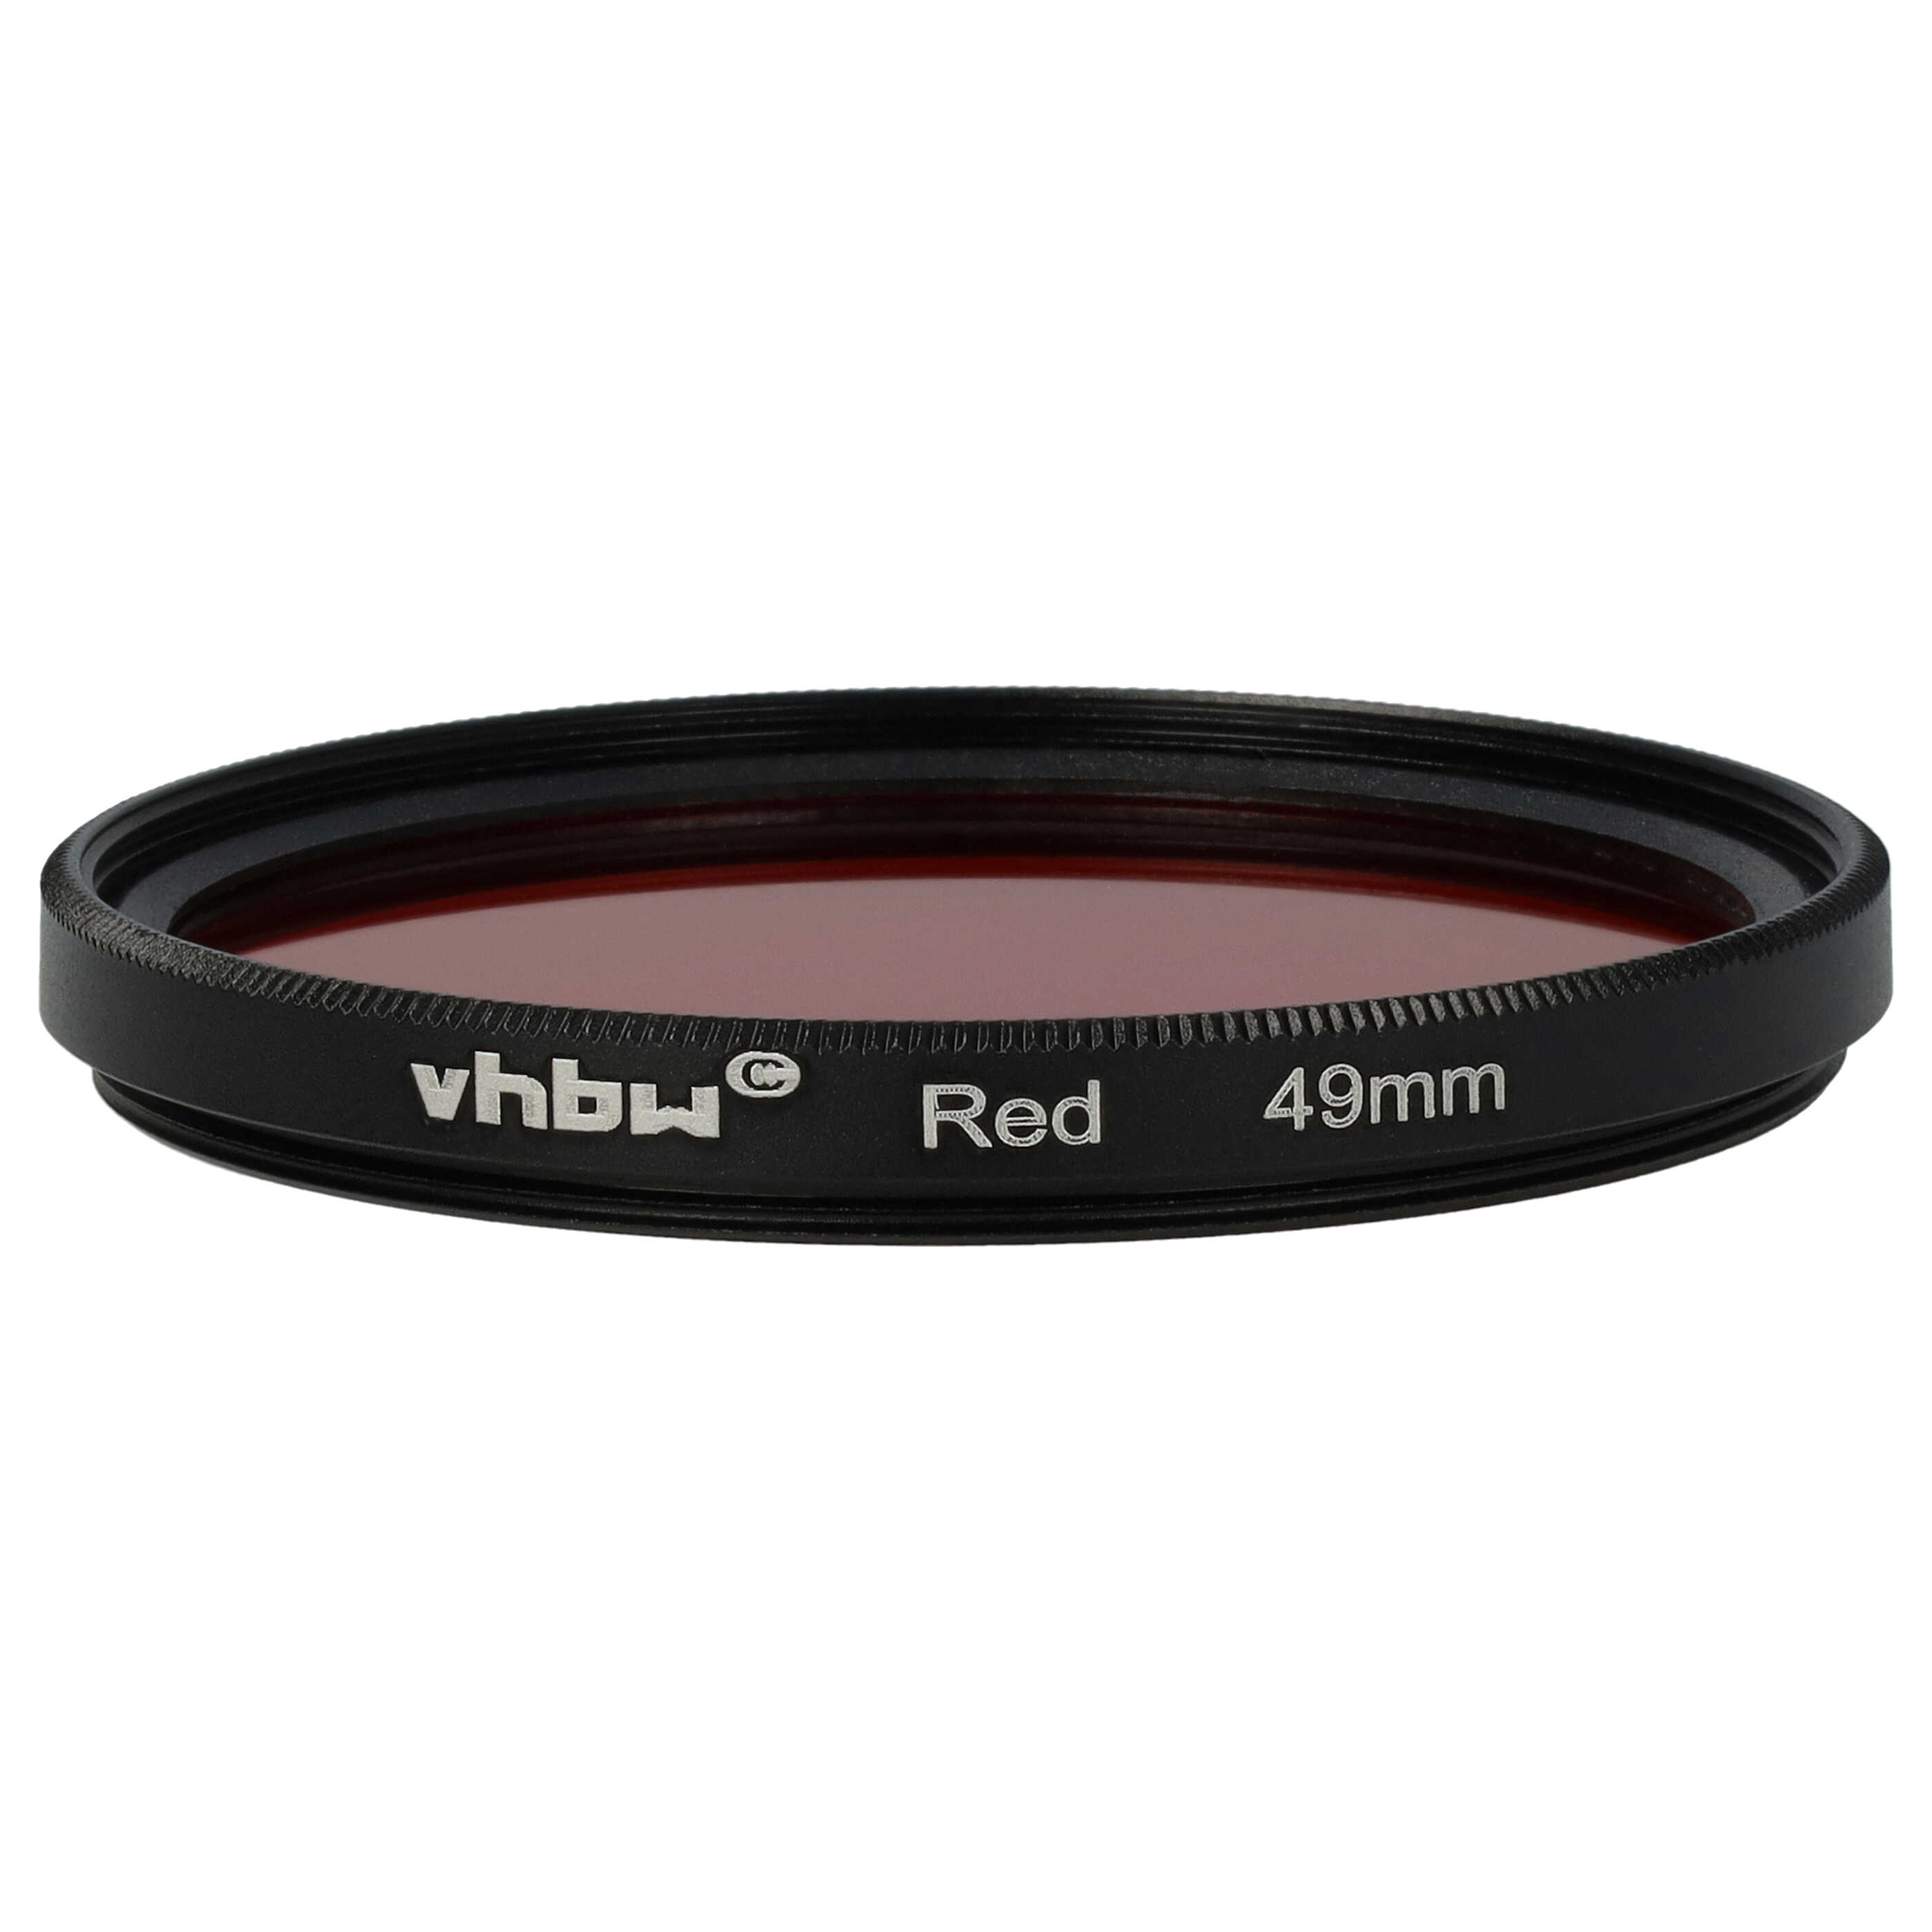 Coloured Filter, Red suitable for Camera Lenses with 49 mm Filter Thread - Red Filter